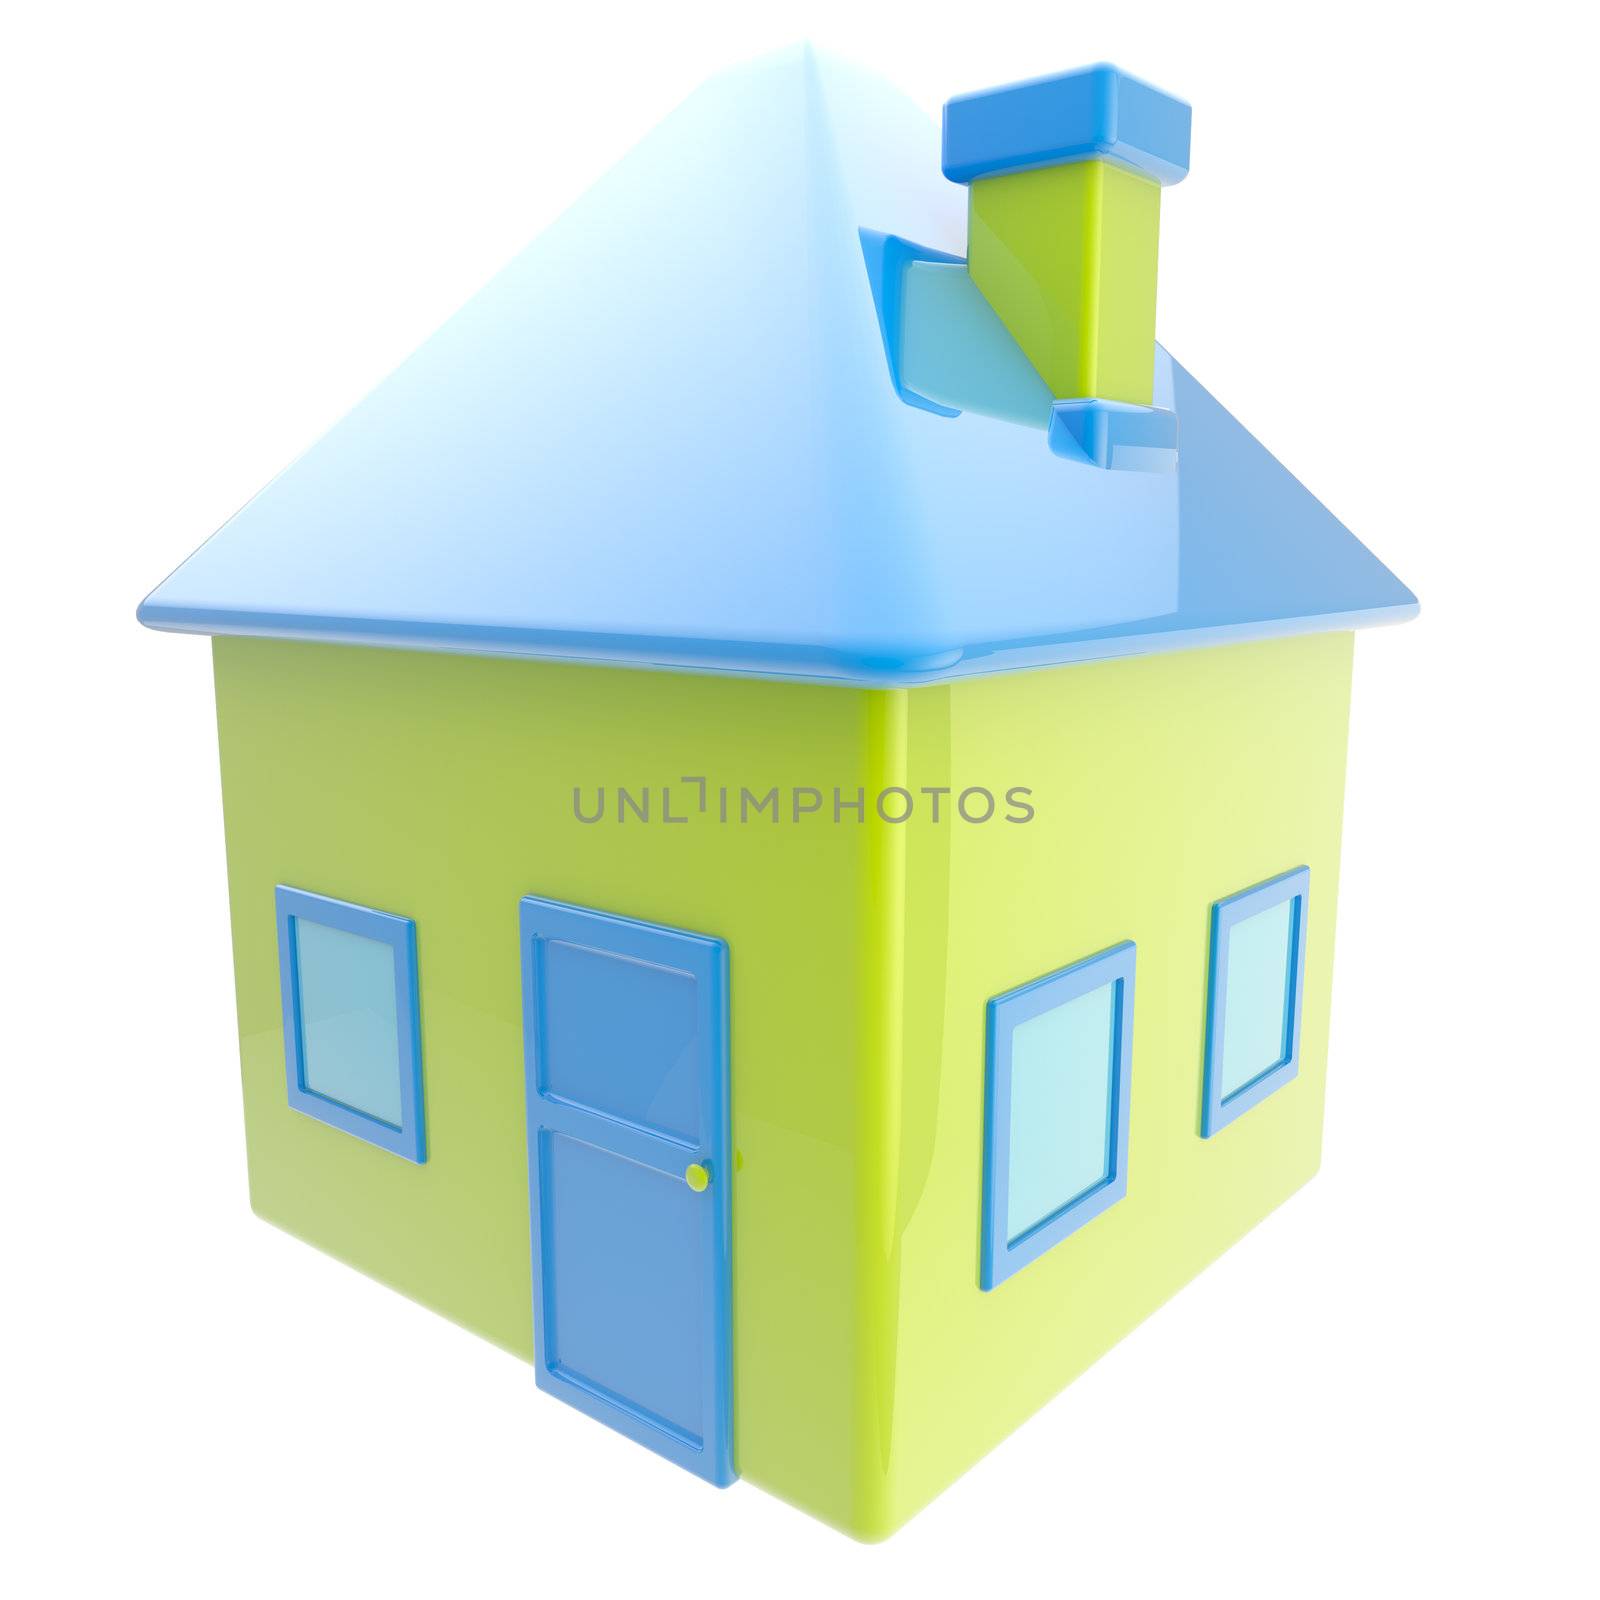 House simple blue and green glossy emblem isolated on grey